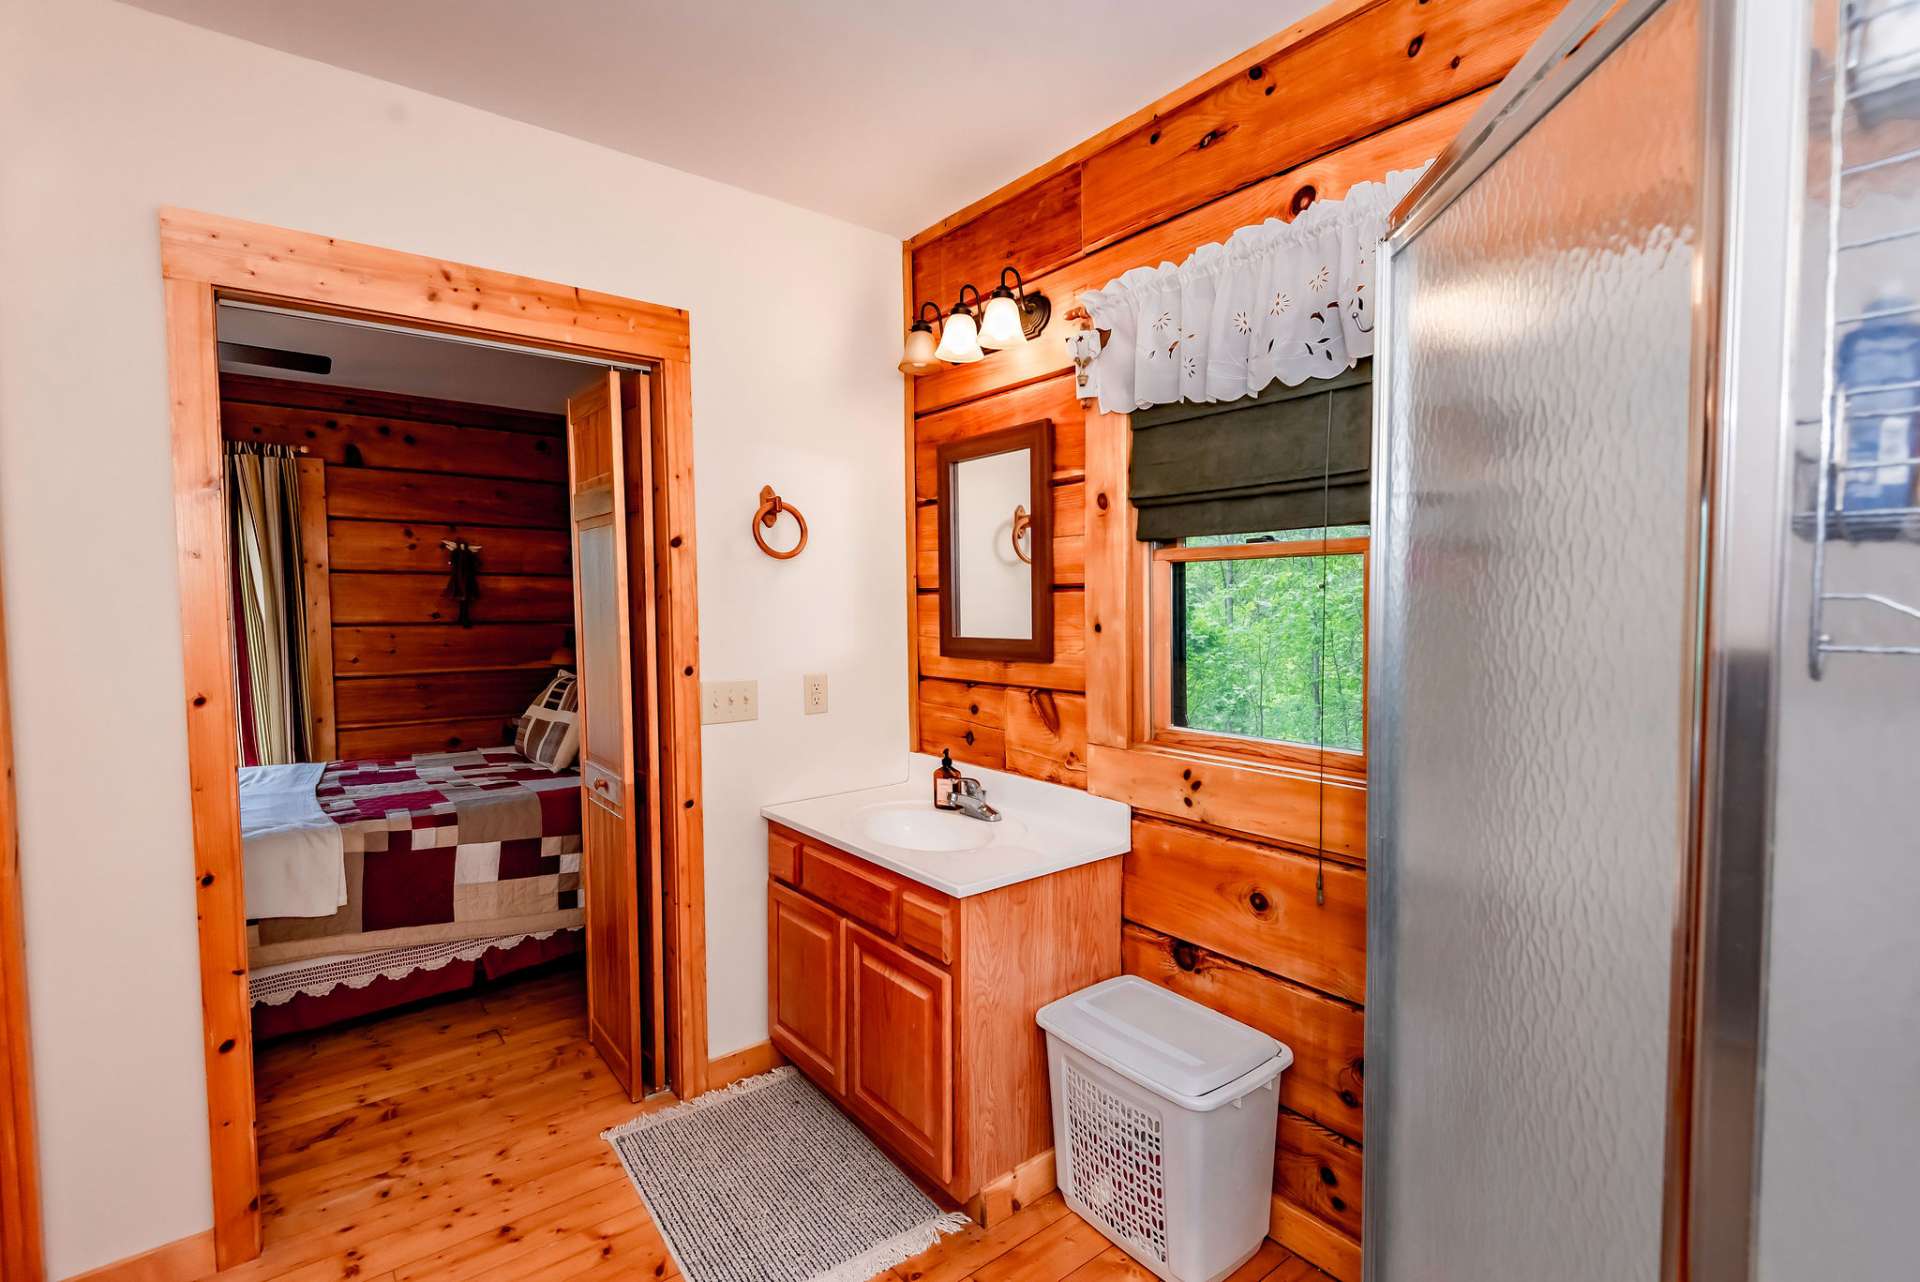 The master bath features a shower unit while the guest bath offers a tub and shower combo.